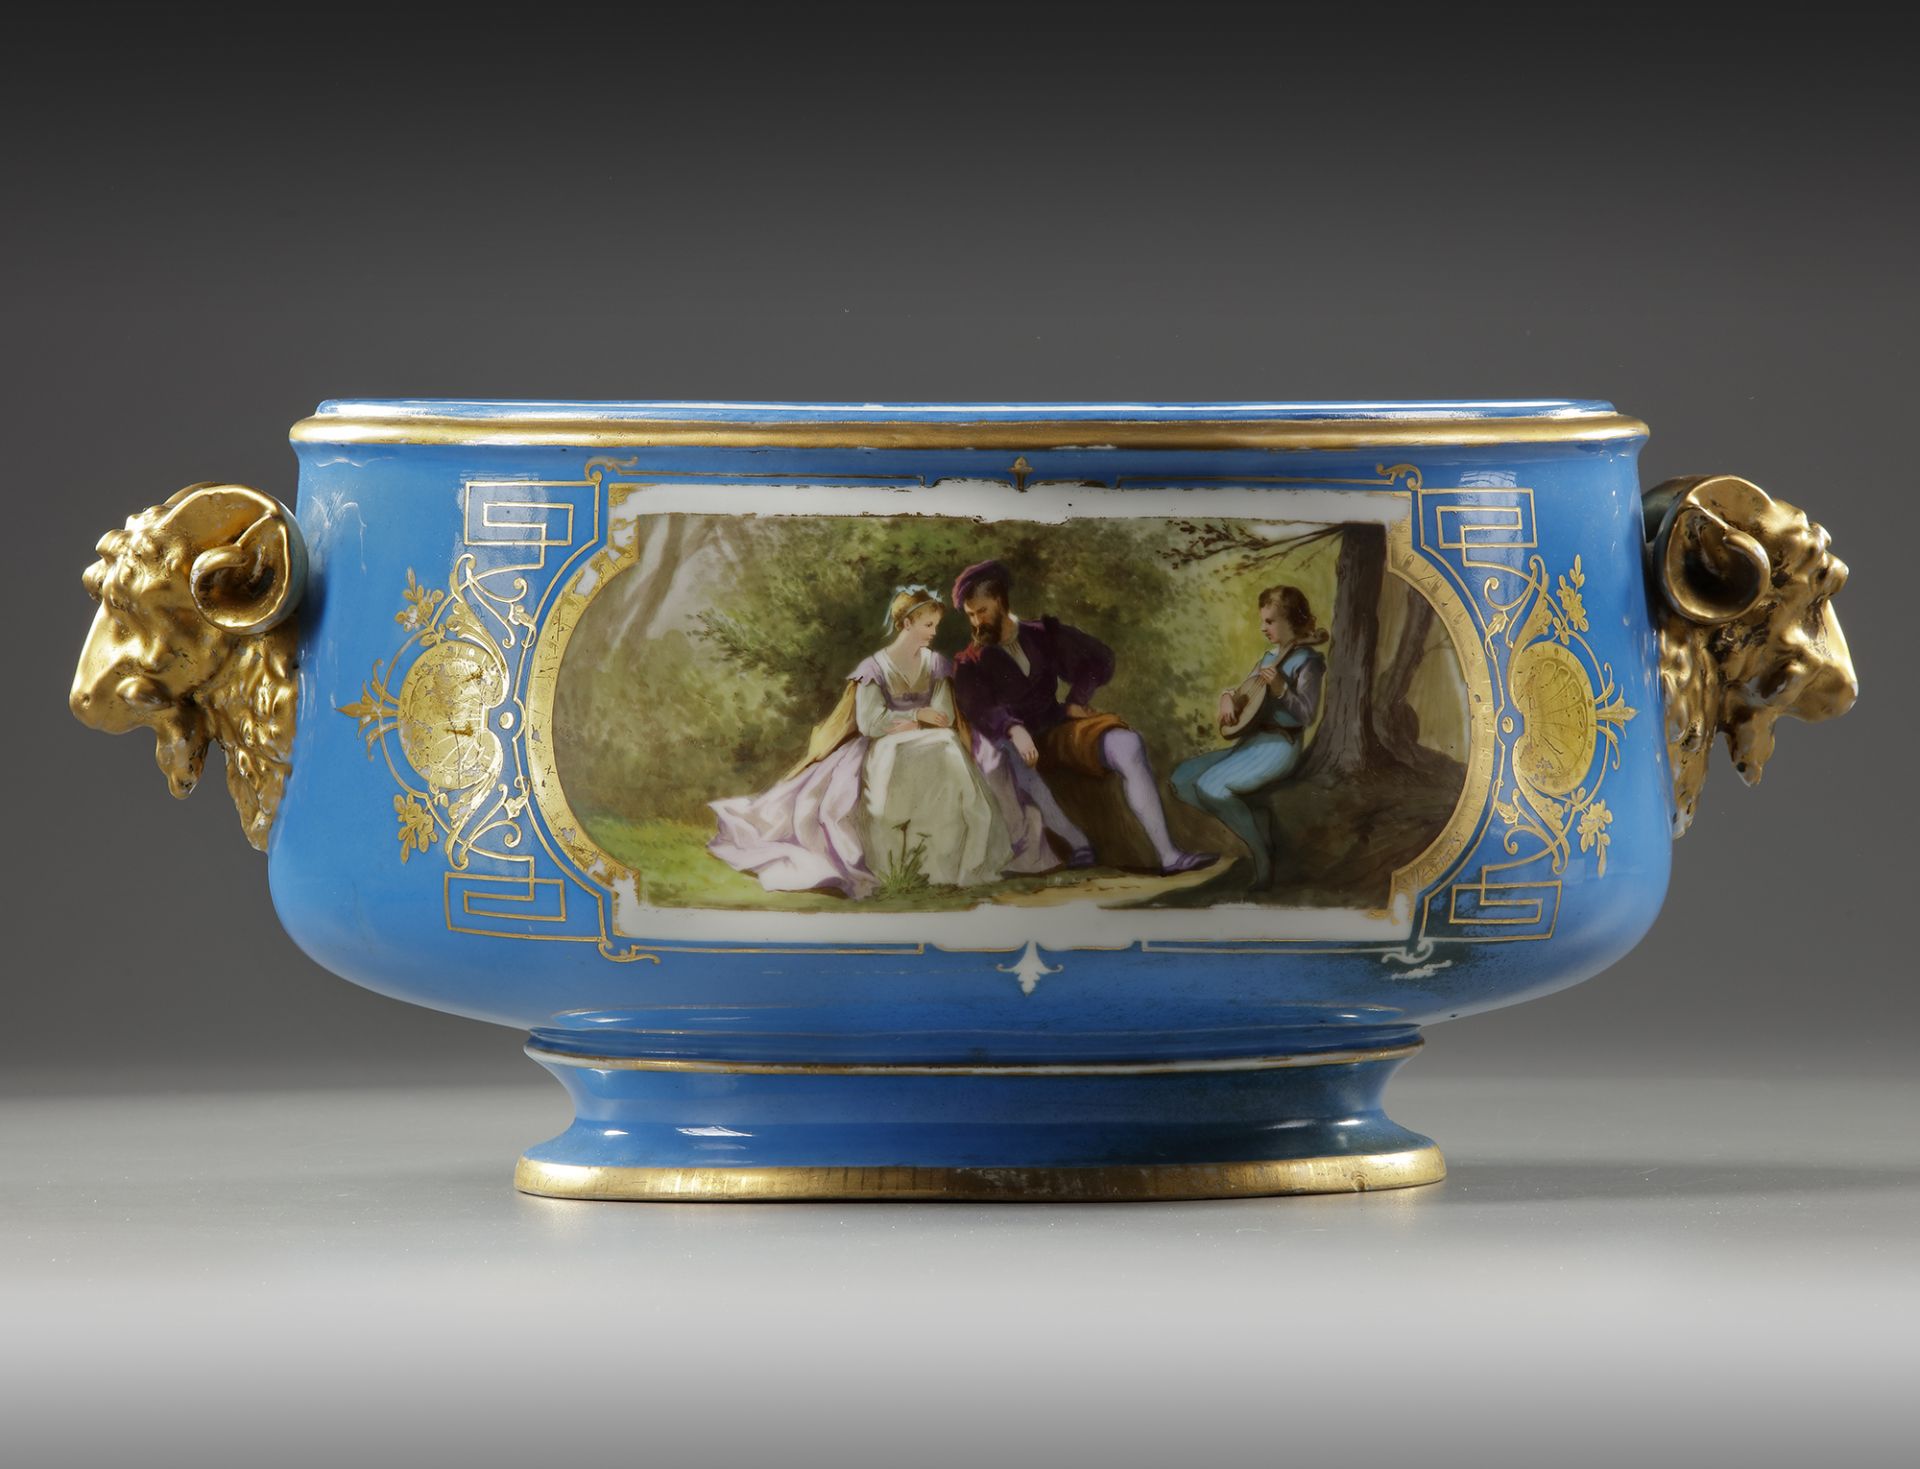 A FRENCH SEVRES PORCELAIN CUP, LATE 19TH CENTURY